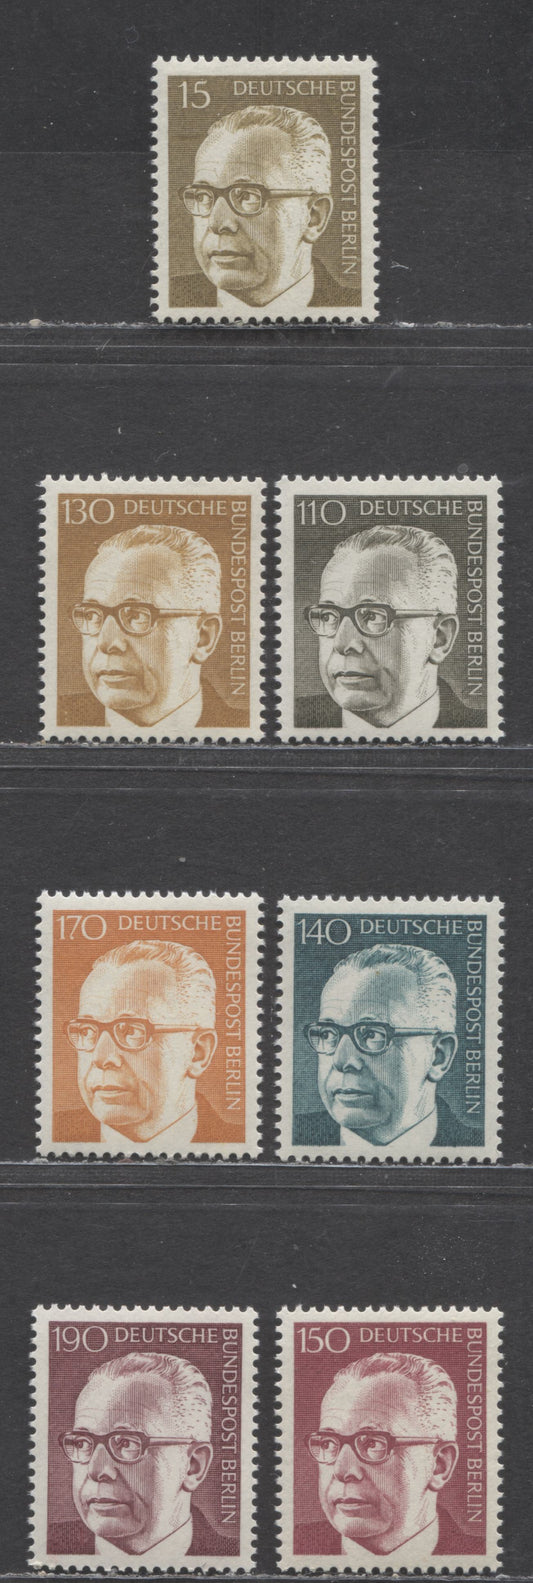 Berlin - Germany Mi#427 (9N286A)-433 (9NB300B) 1972 Heinemann Definitives, 7 VFNH Singles, Click on Listing to See ALL Pictures, Estimated Value $10